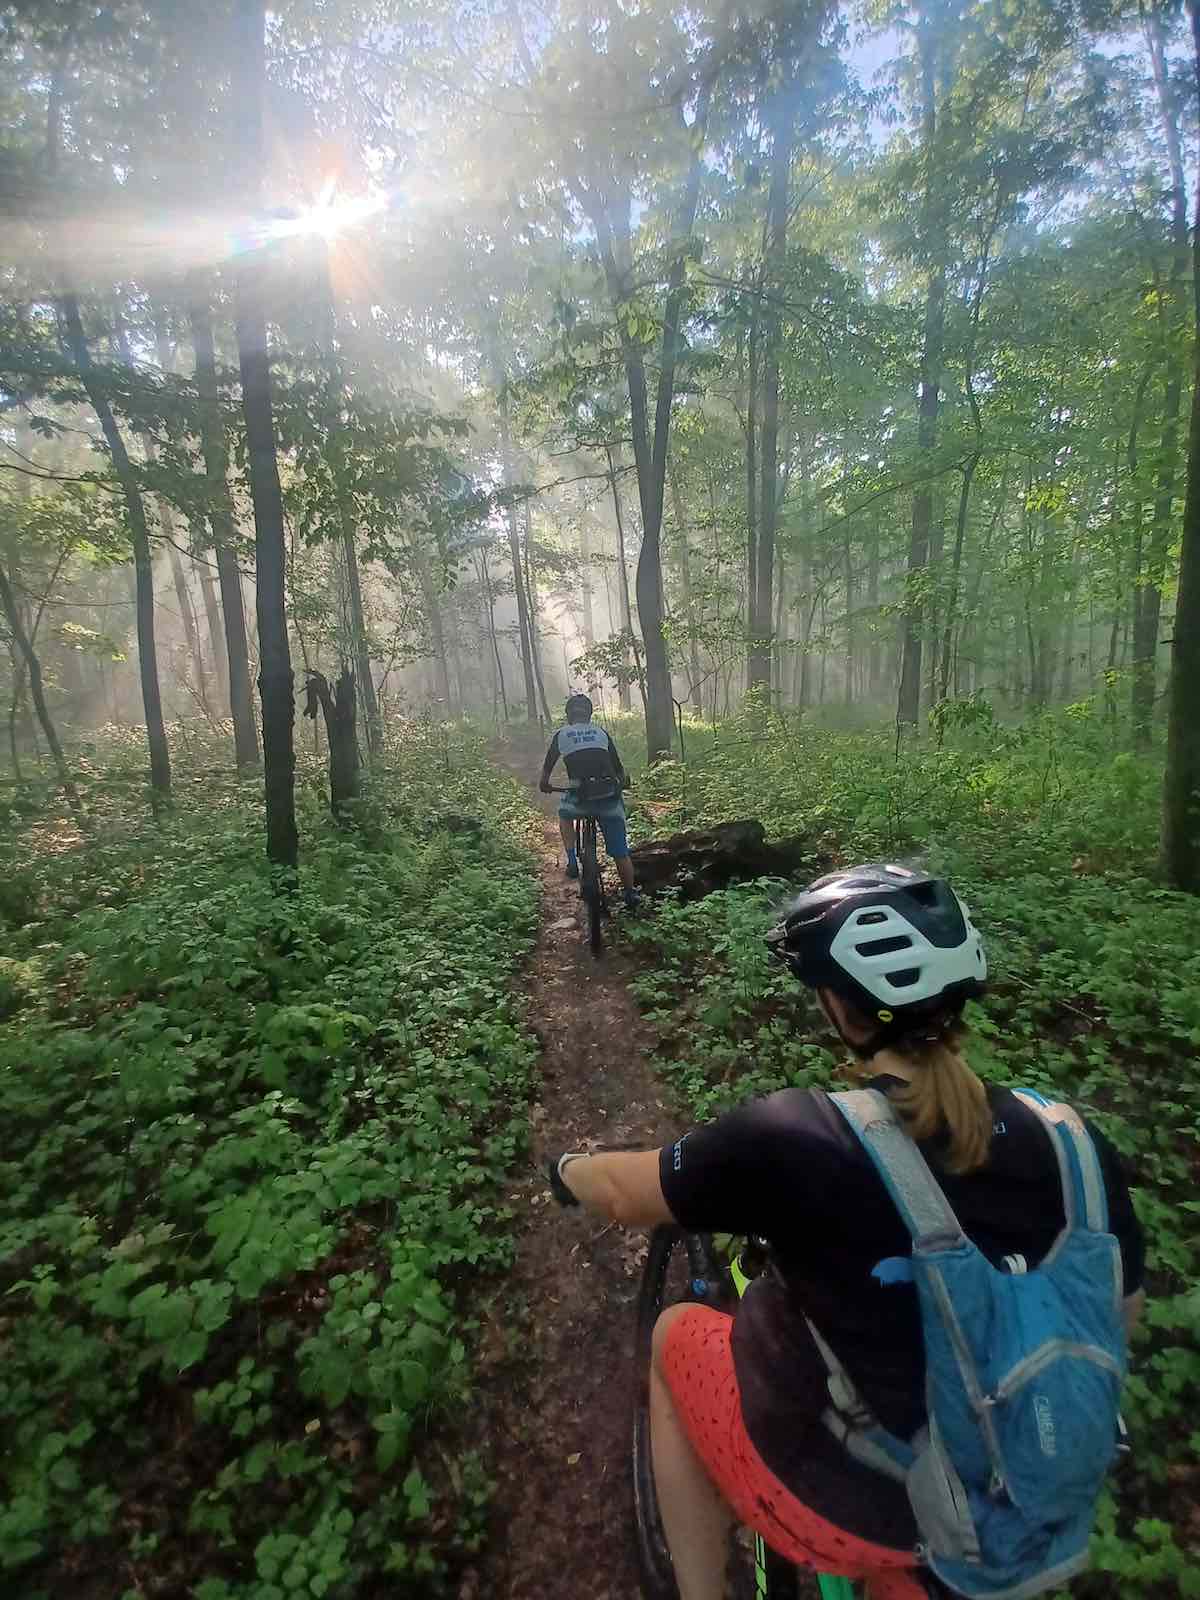 bikerumor pic of the day two cyclists riding on single trail between trees in forest with sun peeking out from the tree canopy.